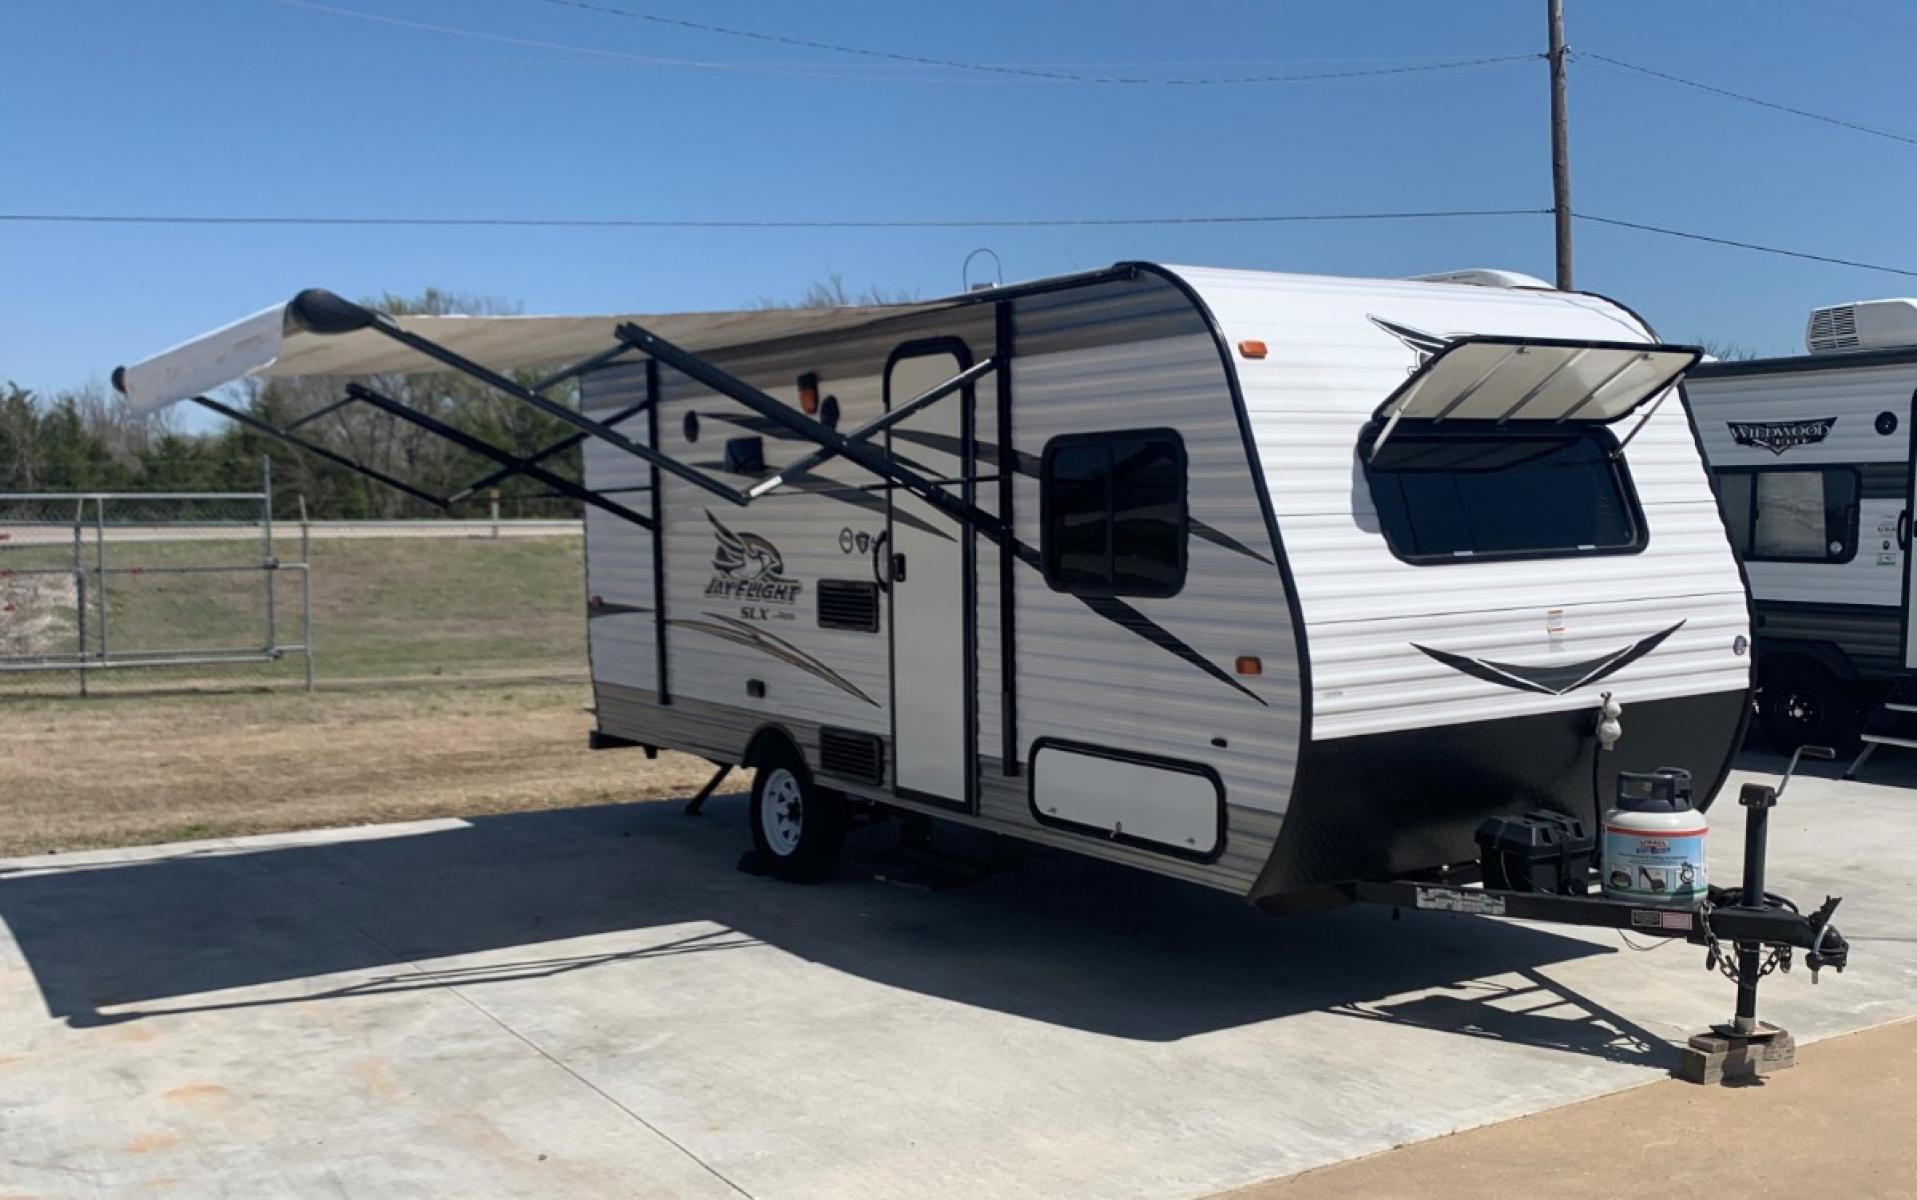 2016 TAN JAYCO Unknown 174BH (1UJBJ0AJ9G1) , located at 17760 Hwy 62, Morris, OK, 74445, 35.609104, -95.877060 - 2016 JAYCO JAY FLIGHT SLX 174BH IS 21.5FT LONG. THE OUTSIDE FEATURES A 10FT POWER AWNING, OUTSIDE STORAGE, OUTSIDE SPEAKERS, SINGLE AXLE, REAR MANUAL LEVELING JACKS, AND SPARE TIRE. AS YOU ENTER THE CAMPER, YOU WILL NOTICE THAT THERE ARE 5 WINDOWS SO YOU CAN LET NATURAL SUNLIGHT IN, THE QUEEN BE - Photo #0